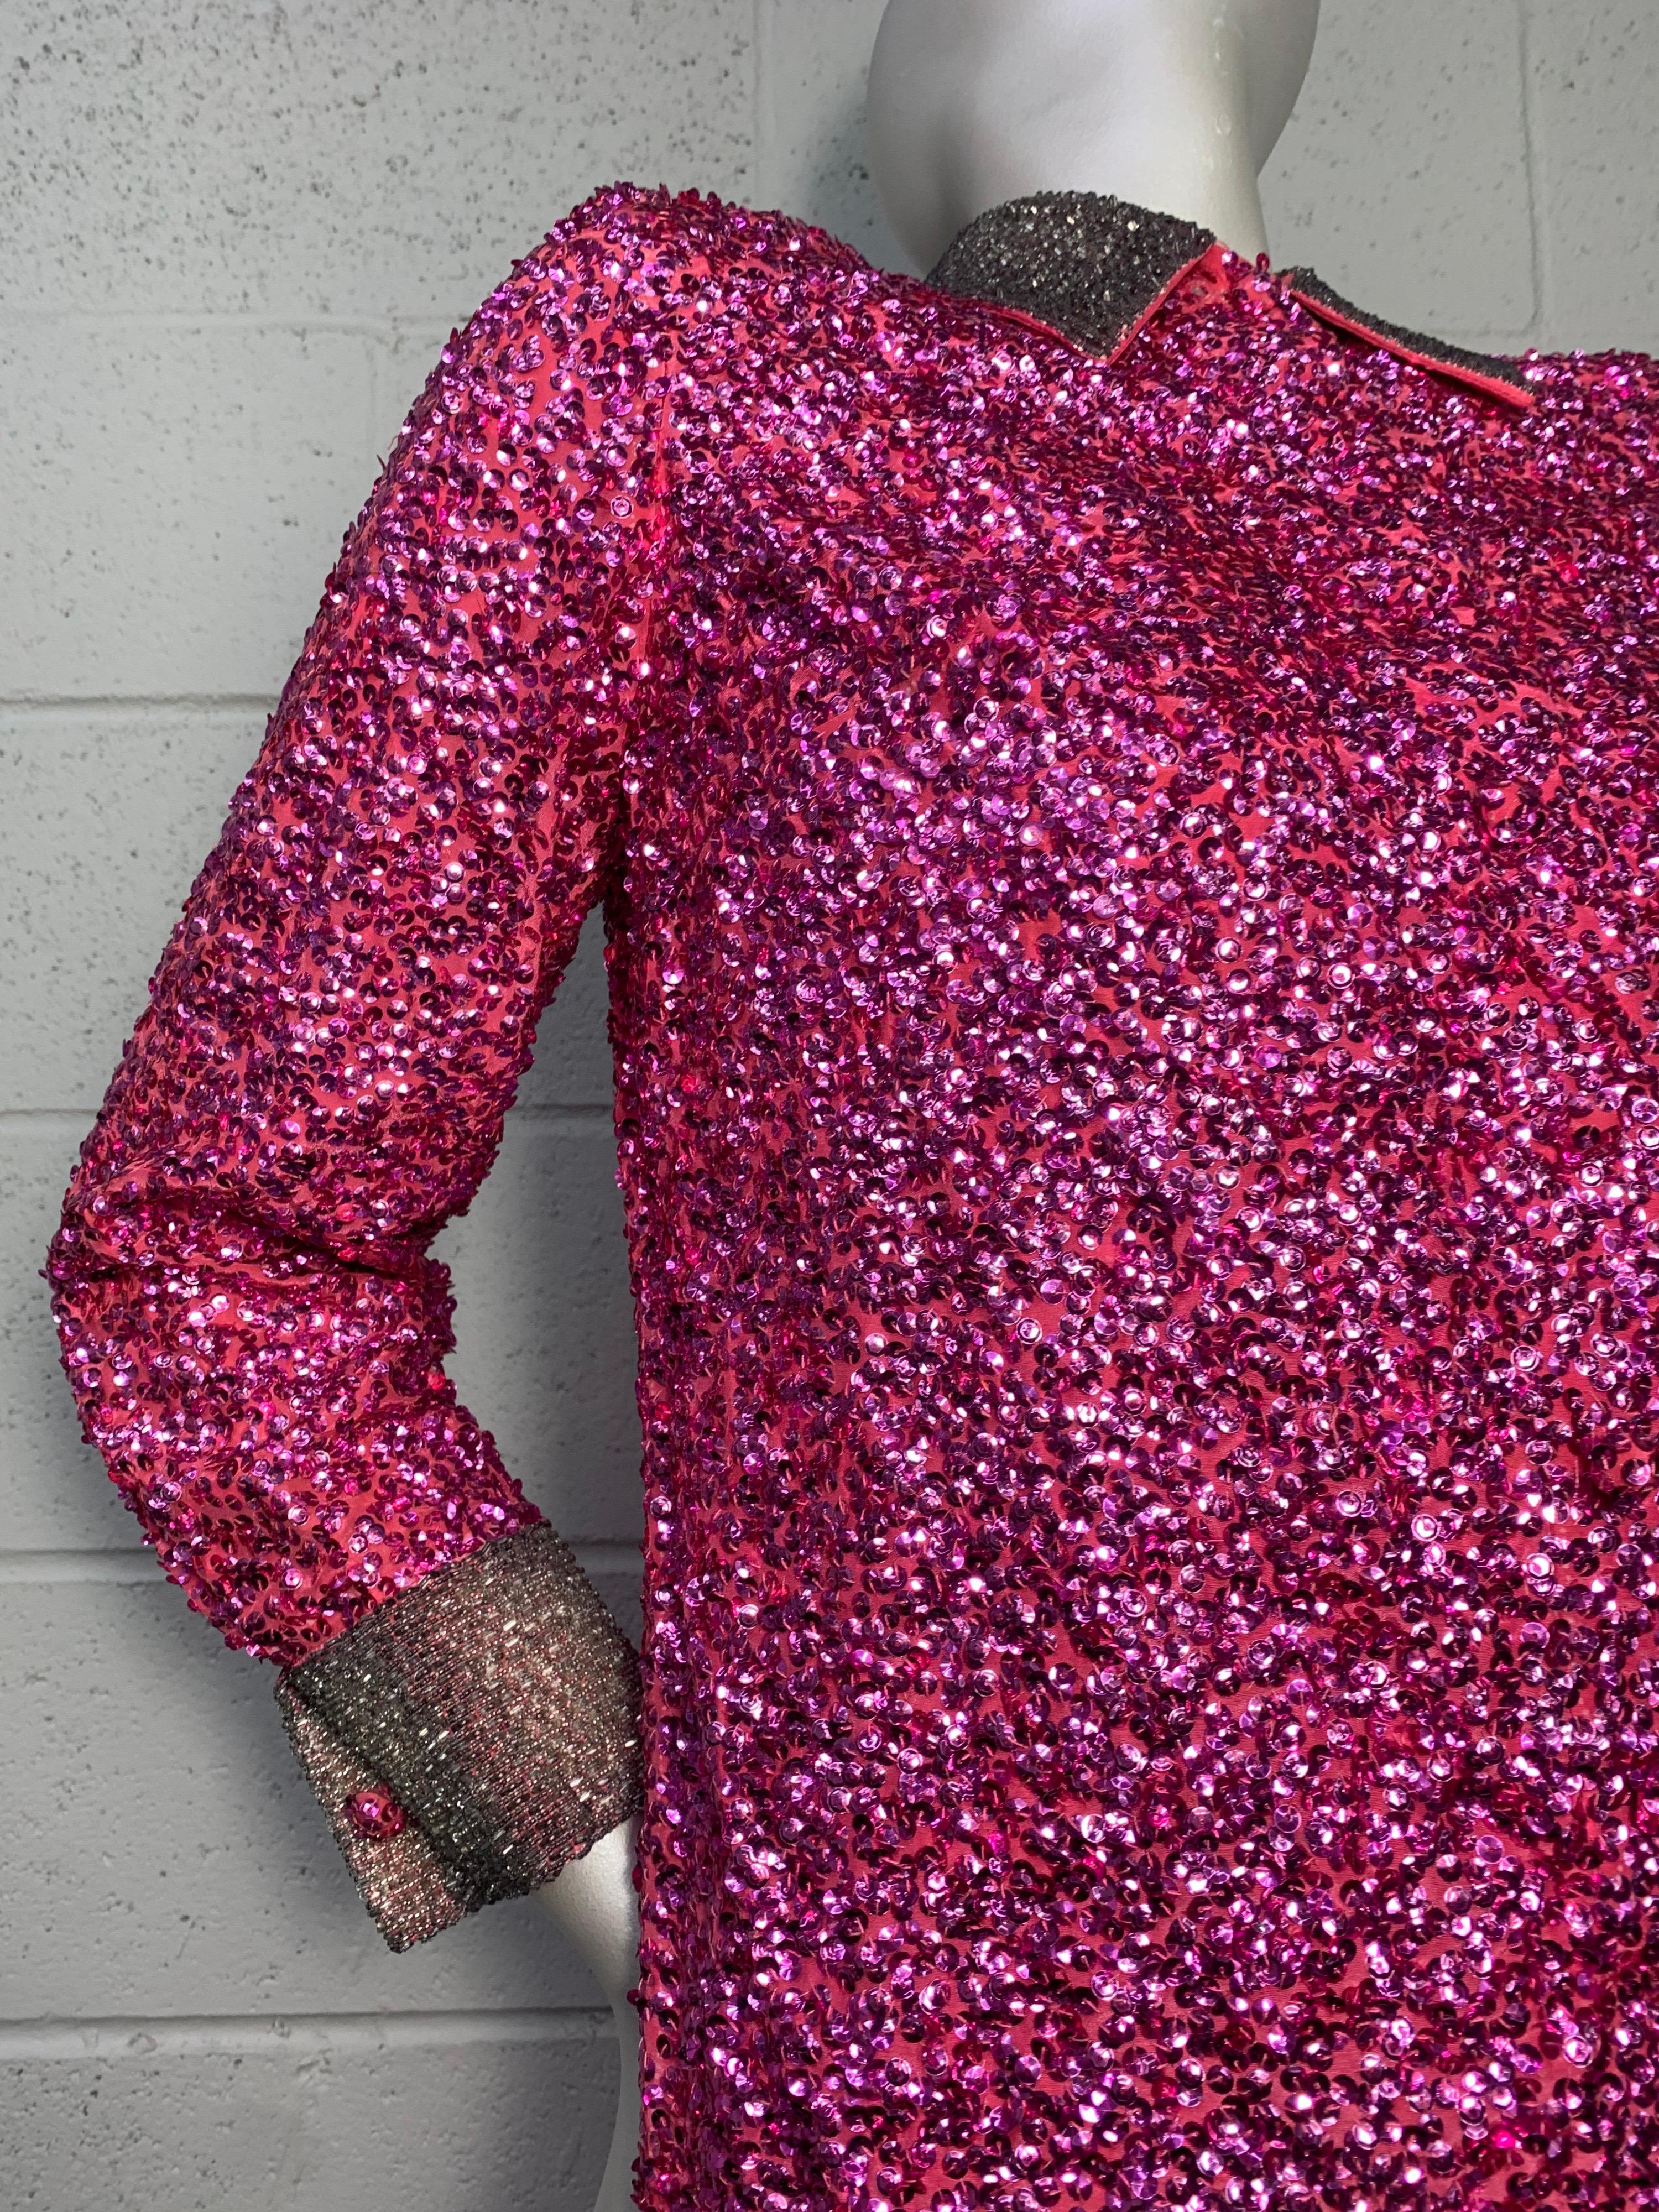 1960s Vivid Fuchsia Sequined Mod Mini Dress w/ Silver Beaded Collar and Cuffs In Excellent Condition For Sale In Gresham, OR